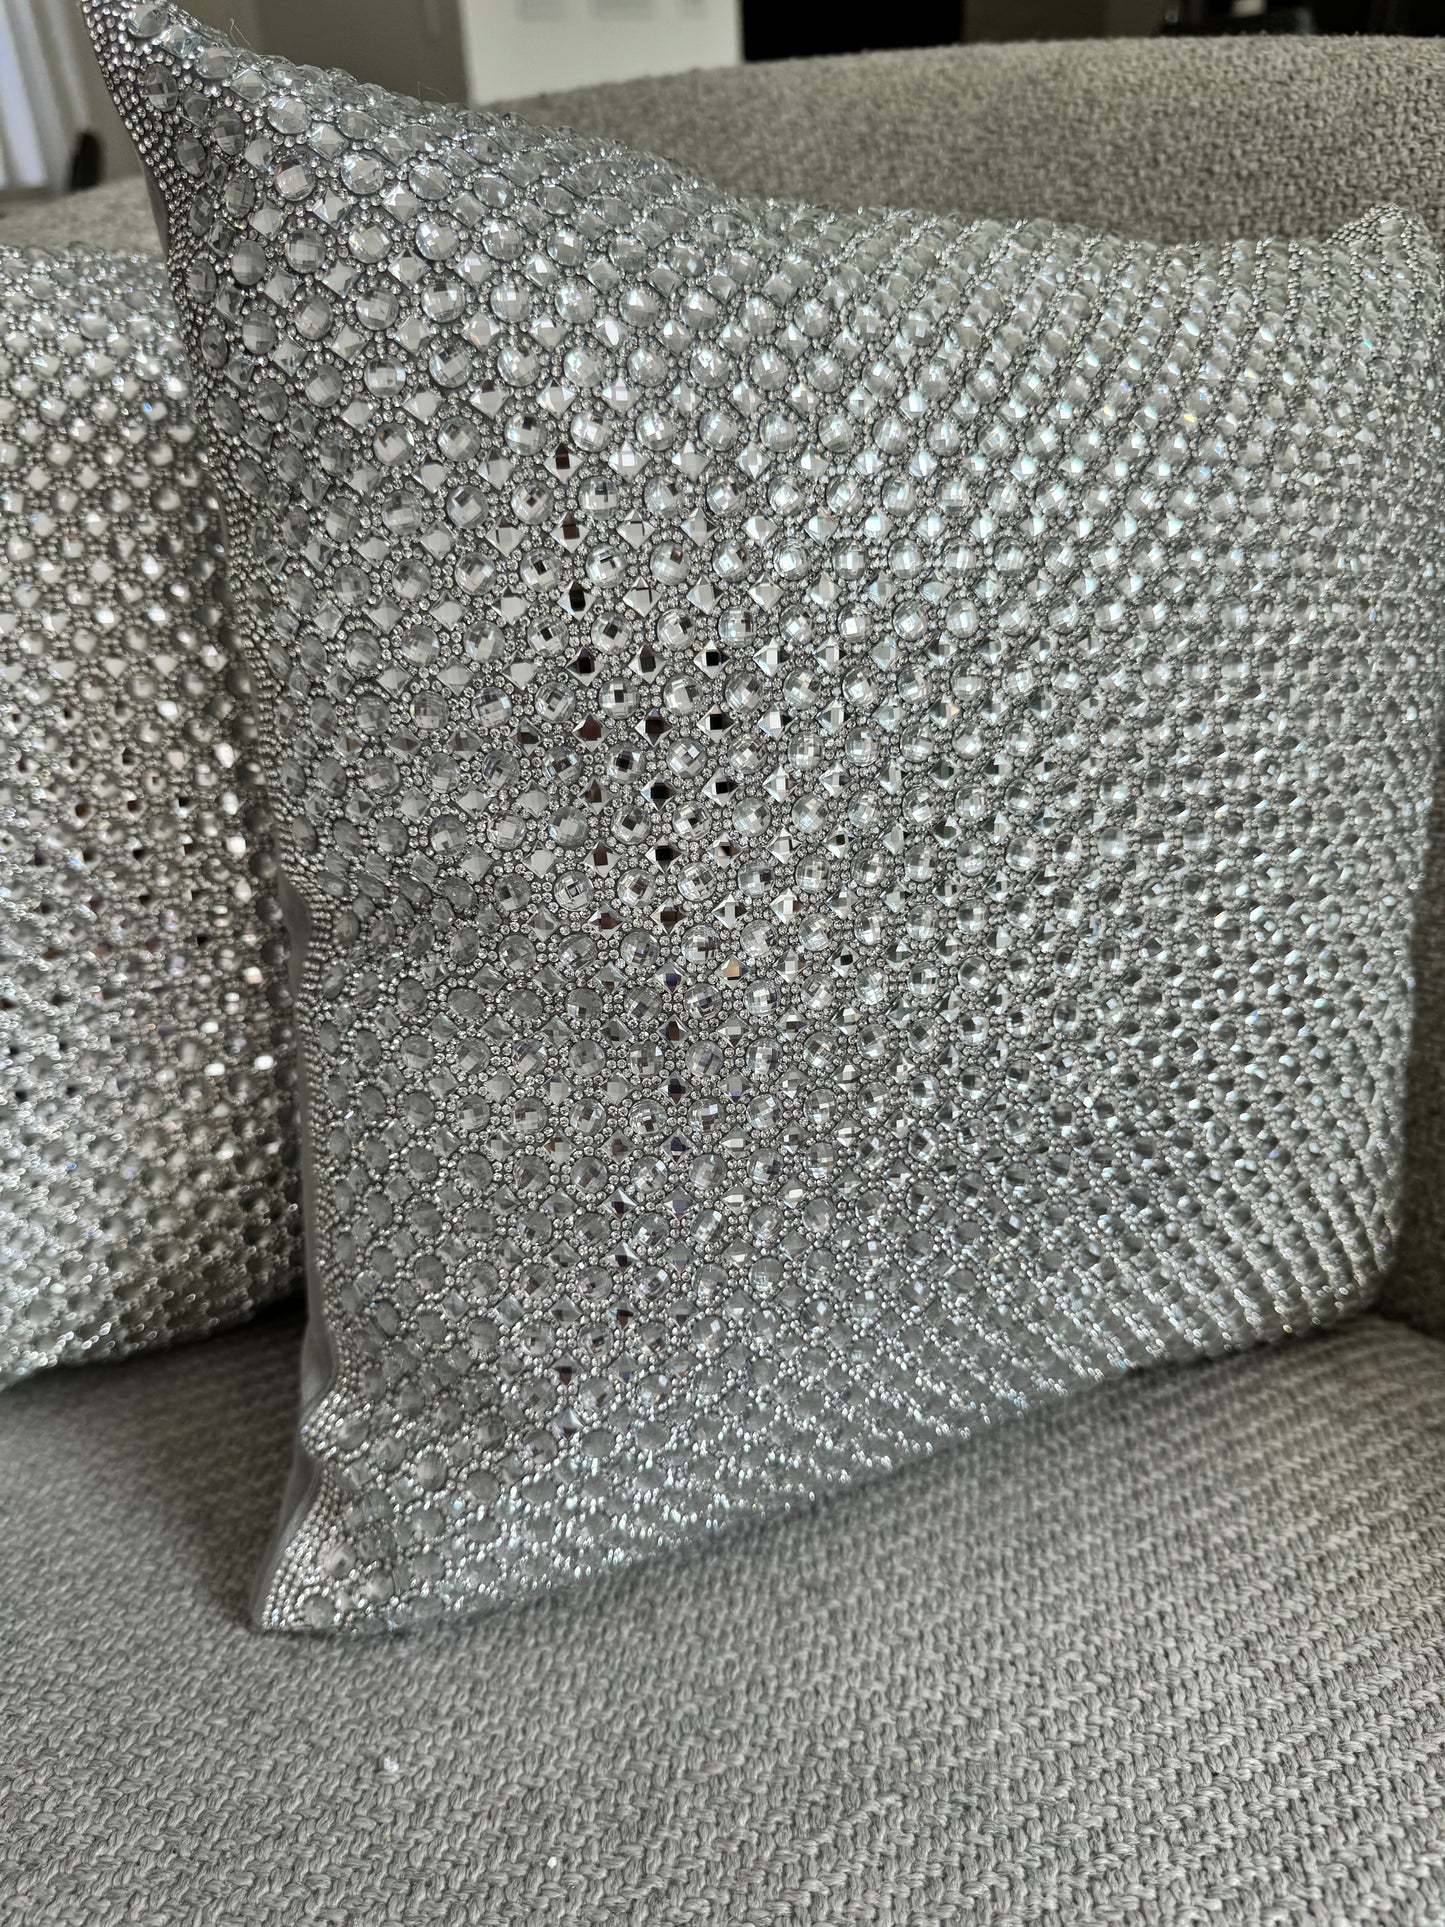 Sparkles Home Rhinestone 16x16 Montaigne Jeweled Gray Crystal Crystals Sparkle Silver Bling Luxury Decorative Decor Pillow